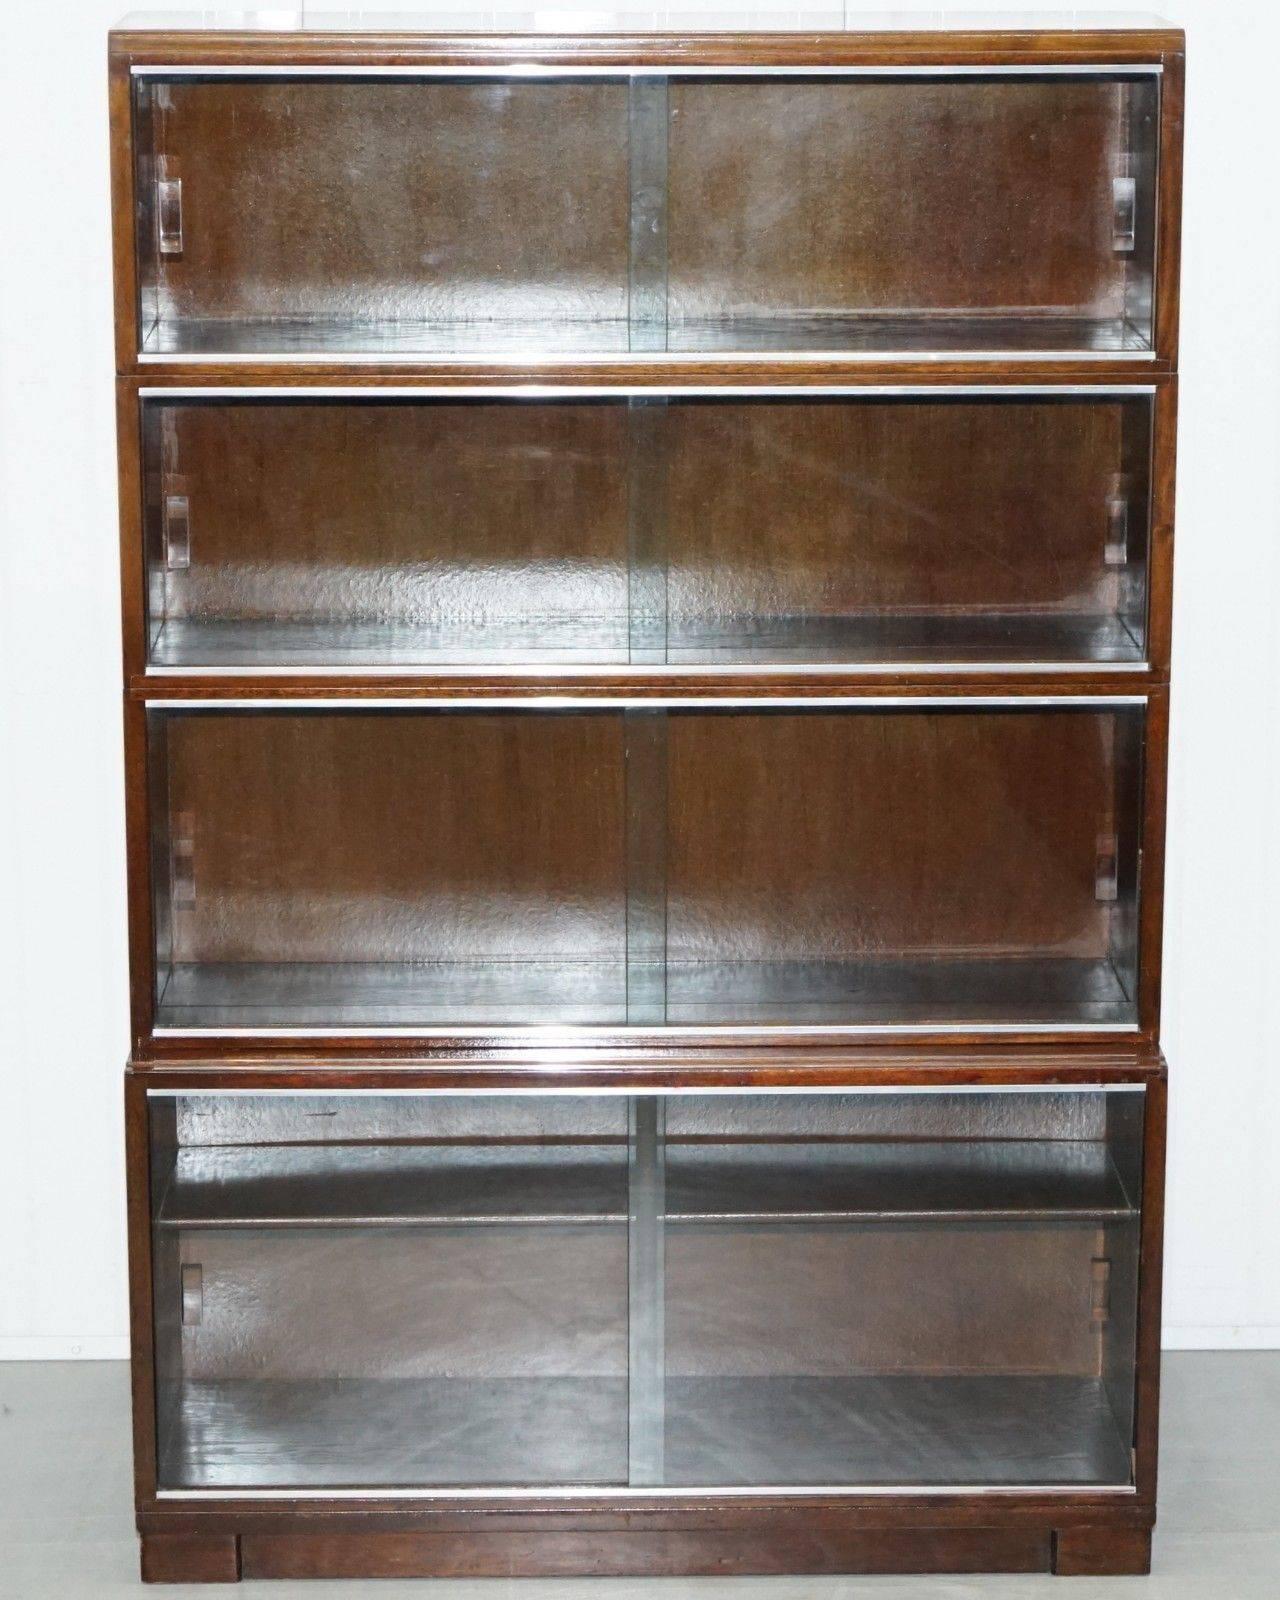 We are delighted to offer for sale this stunning vintage Minty oxford stacking Library bookcase

A good looking and well made piece, supplied the greatest stacking bookcase company this country has ever seen, the glass doors slide effortlessly and